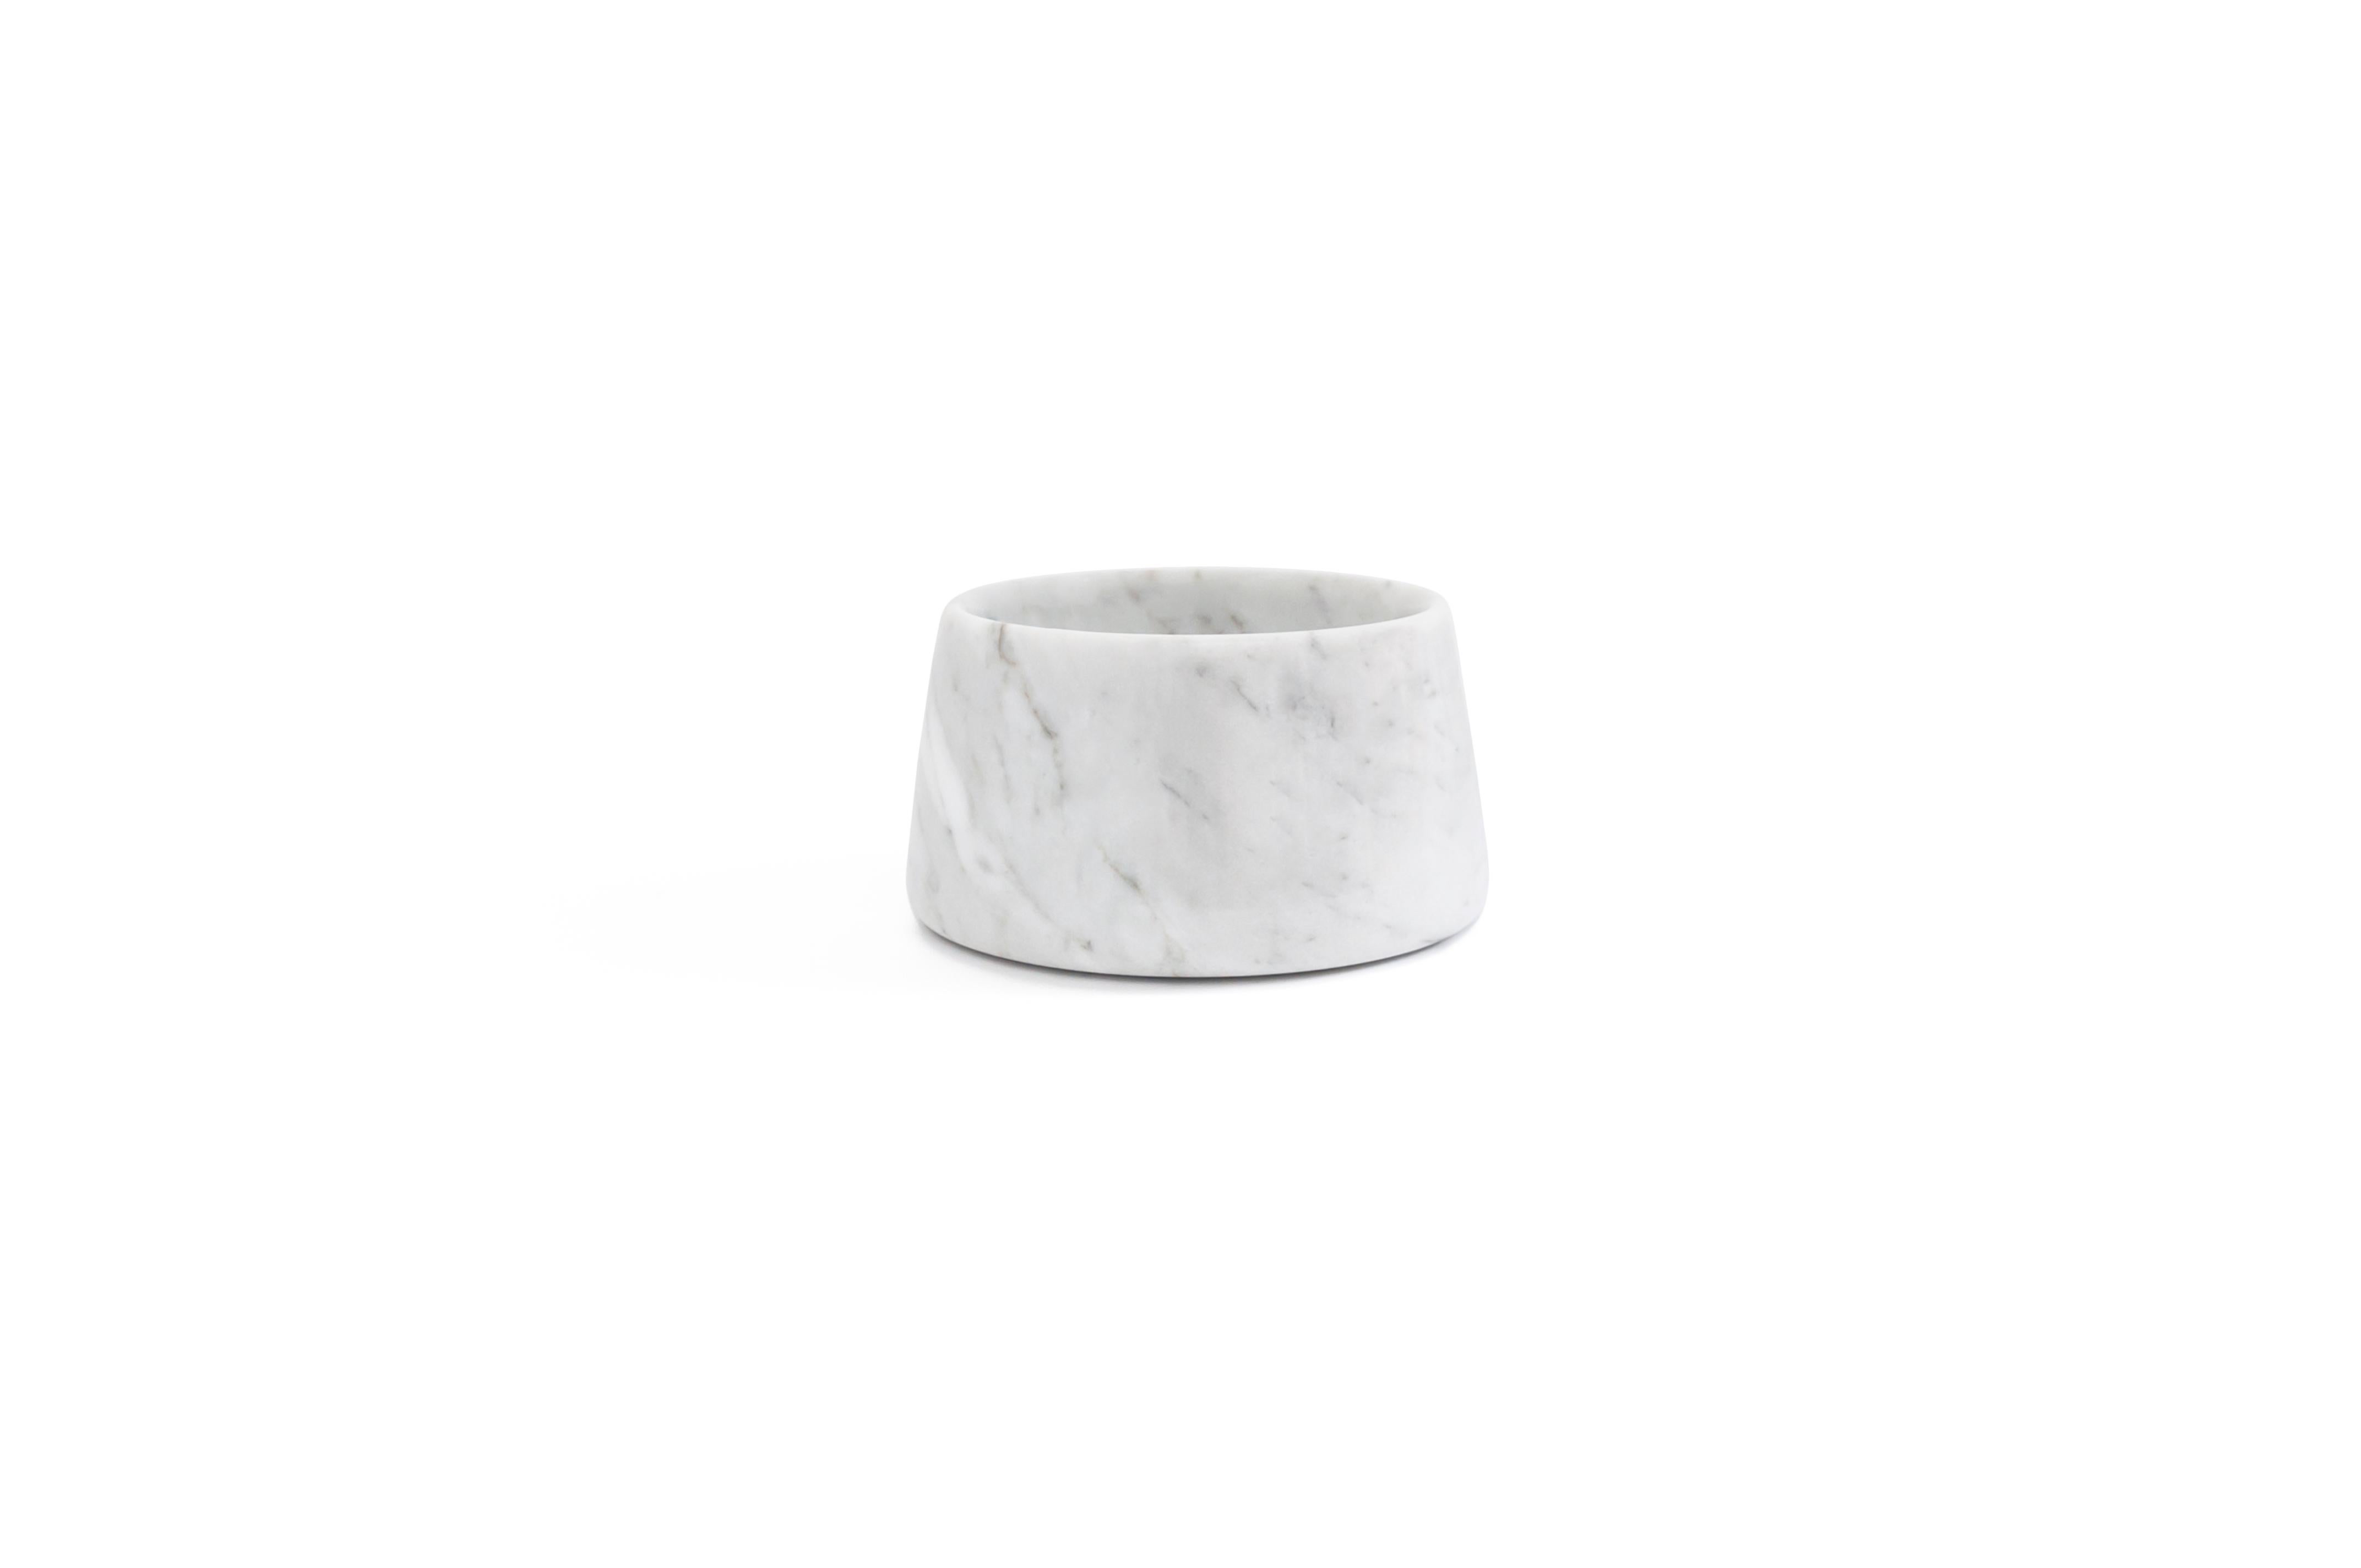 White Carrara marble bowl for cats or dogs, made in Italy, Carrara. Size small.
Each piece is in a way unique (every marble block is different in veins and shades) and handmade by Italian artisans specialized over generations in processing marble.